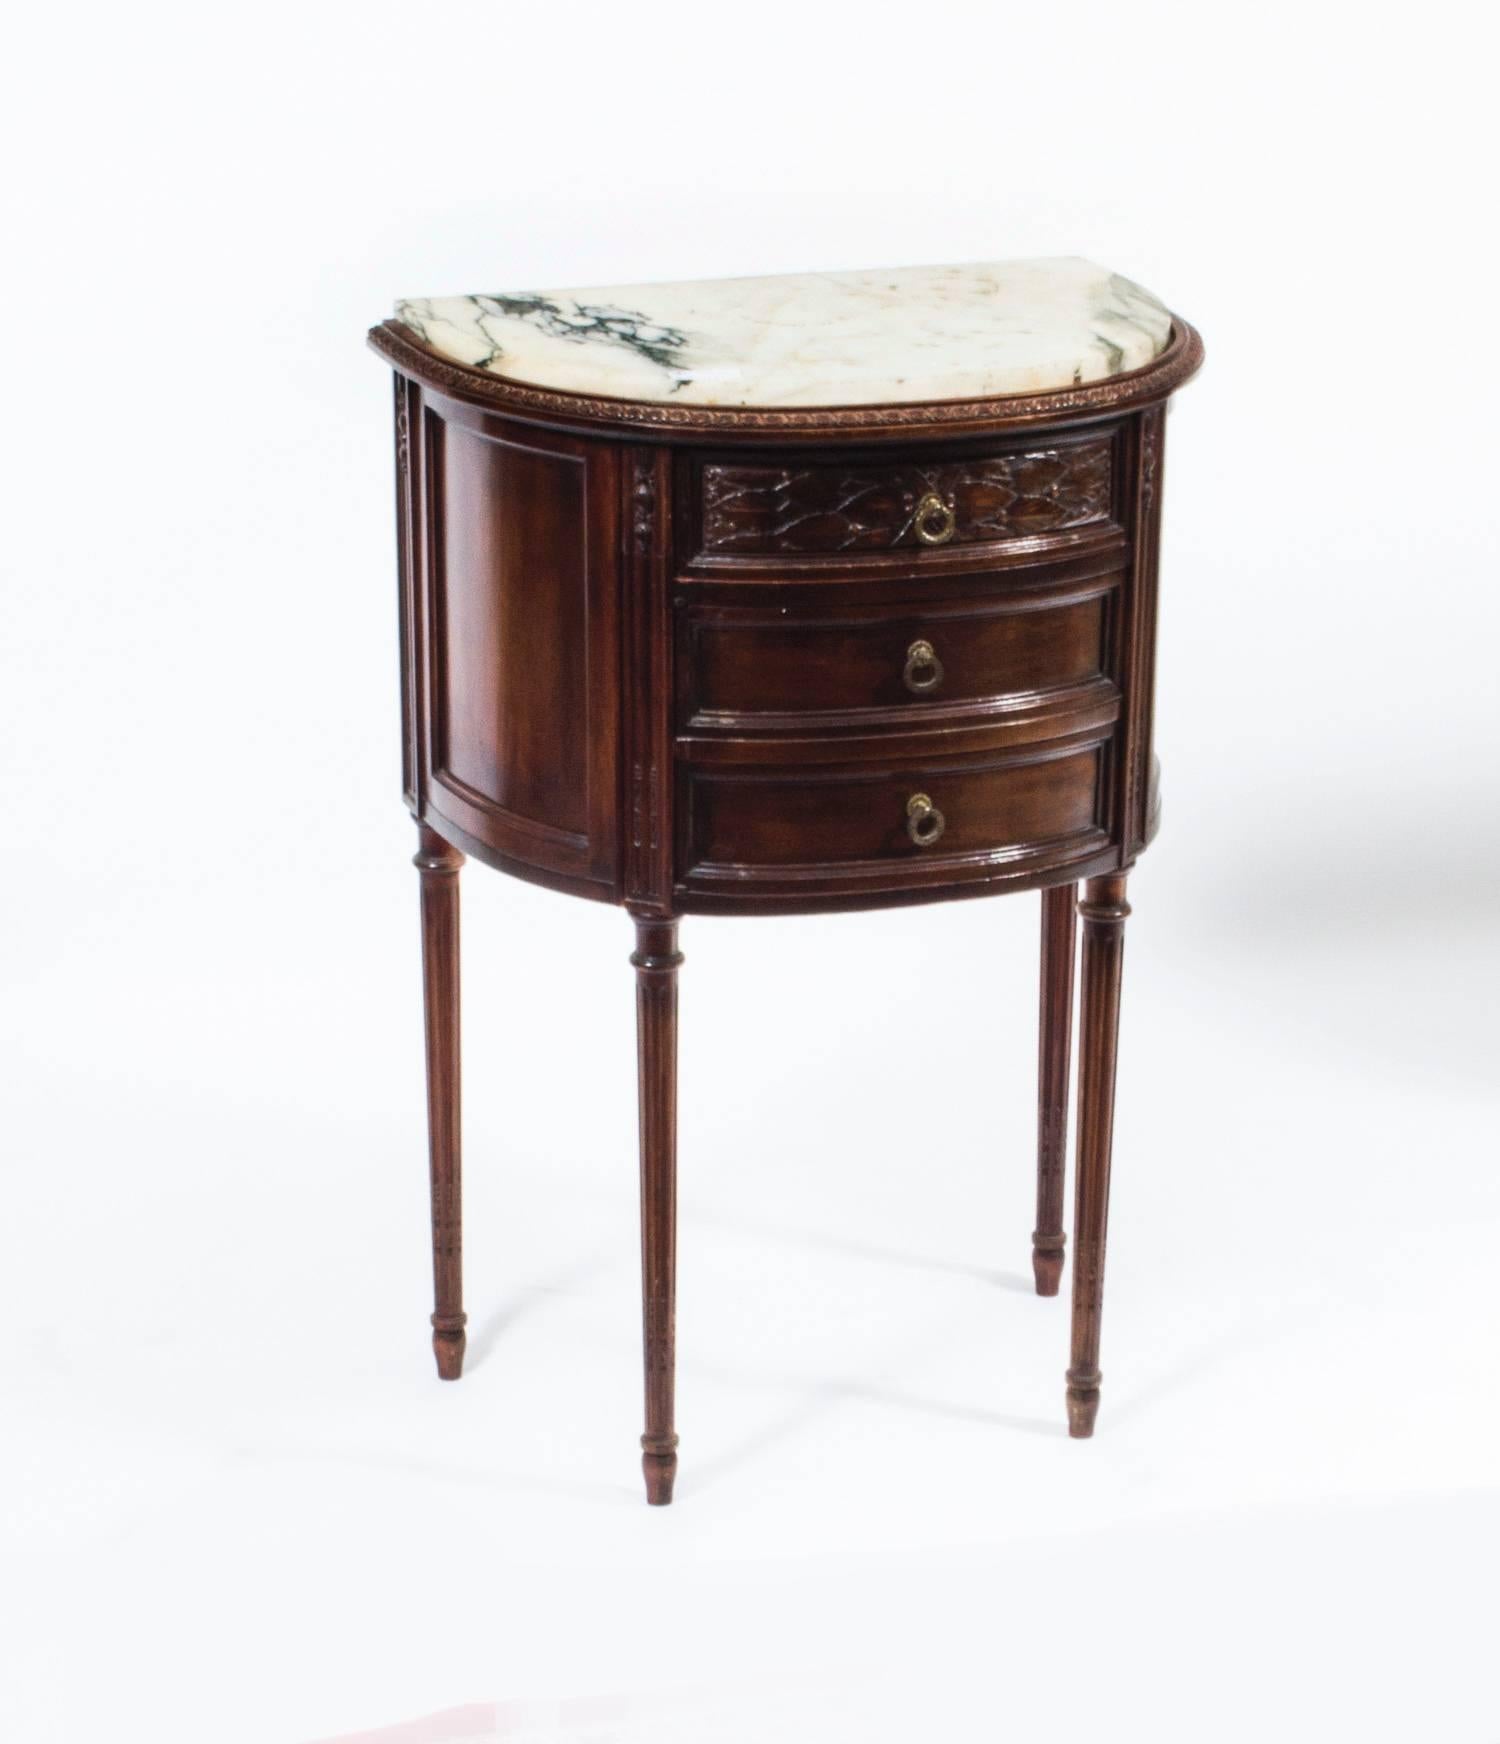 This is a thoroughly delightful and rare pair of antique Italian D-shaped marble topped bedside cabinets, circa 1900.

They have been accomplished in mahogany and each has a fantastic laurel carved drawer over two faux drawer fronts which are